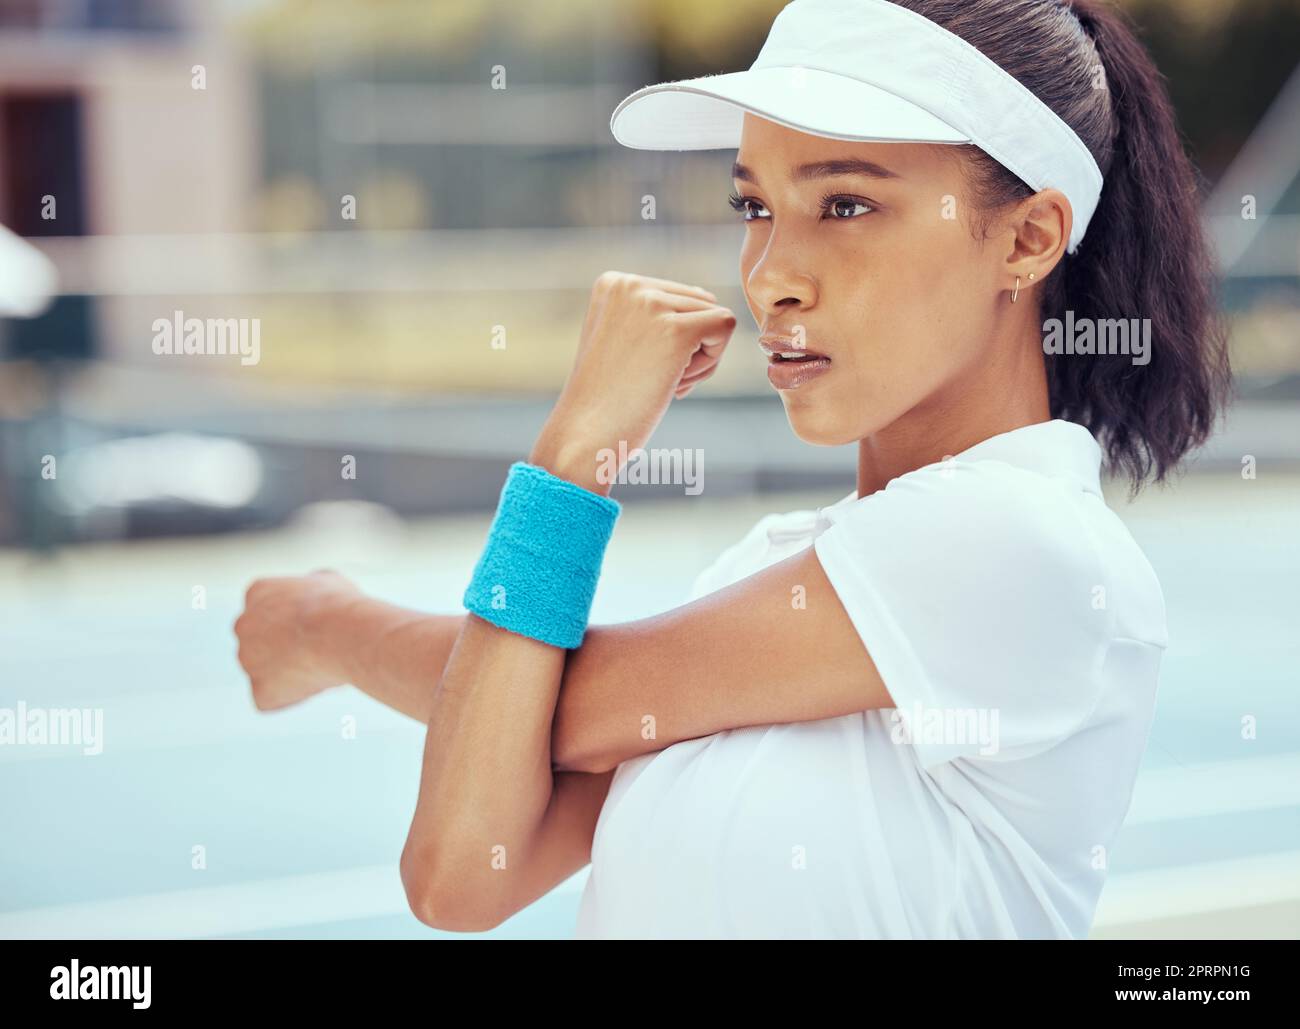 Tennis woman, competitive sport and warmup exercise with a player stretching to prepare for a game or match at an outdoor court. Fitness, competition and workout with a serious female ready to play Stock Photo